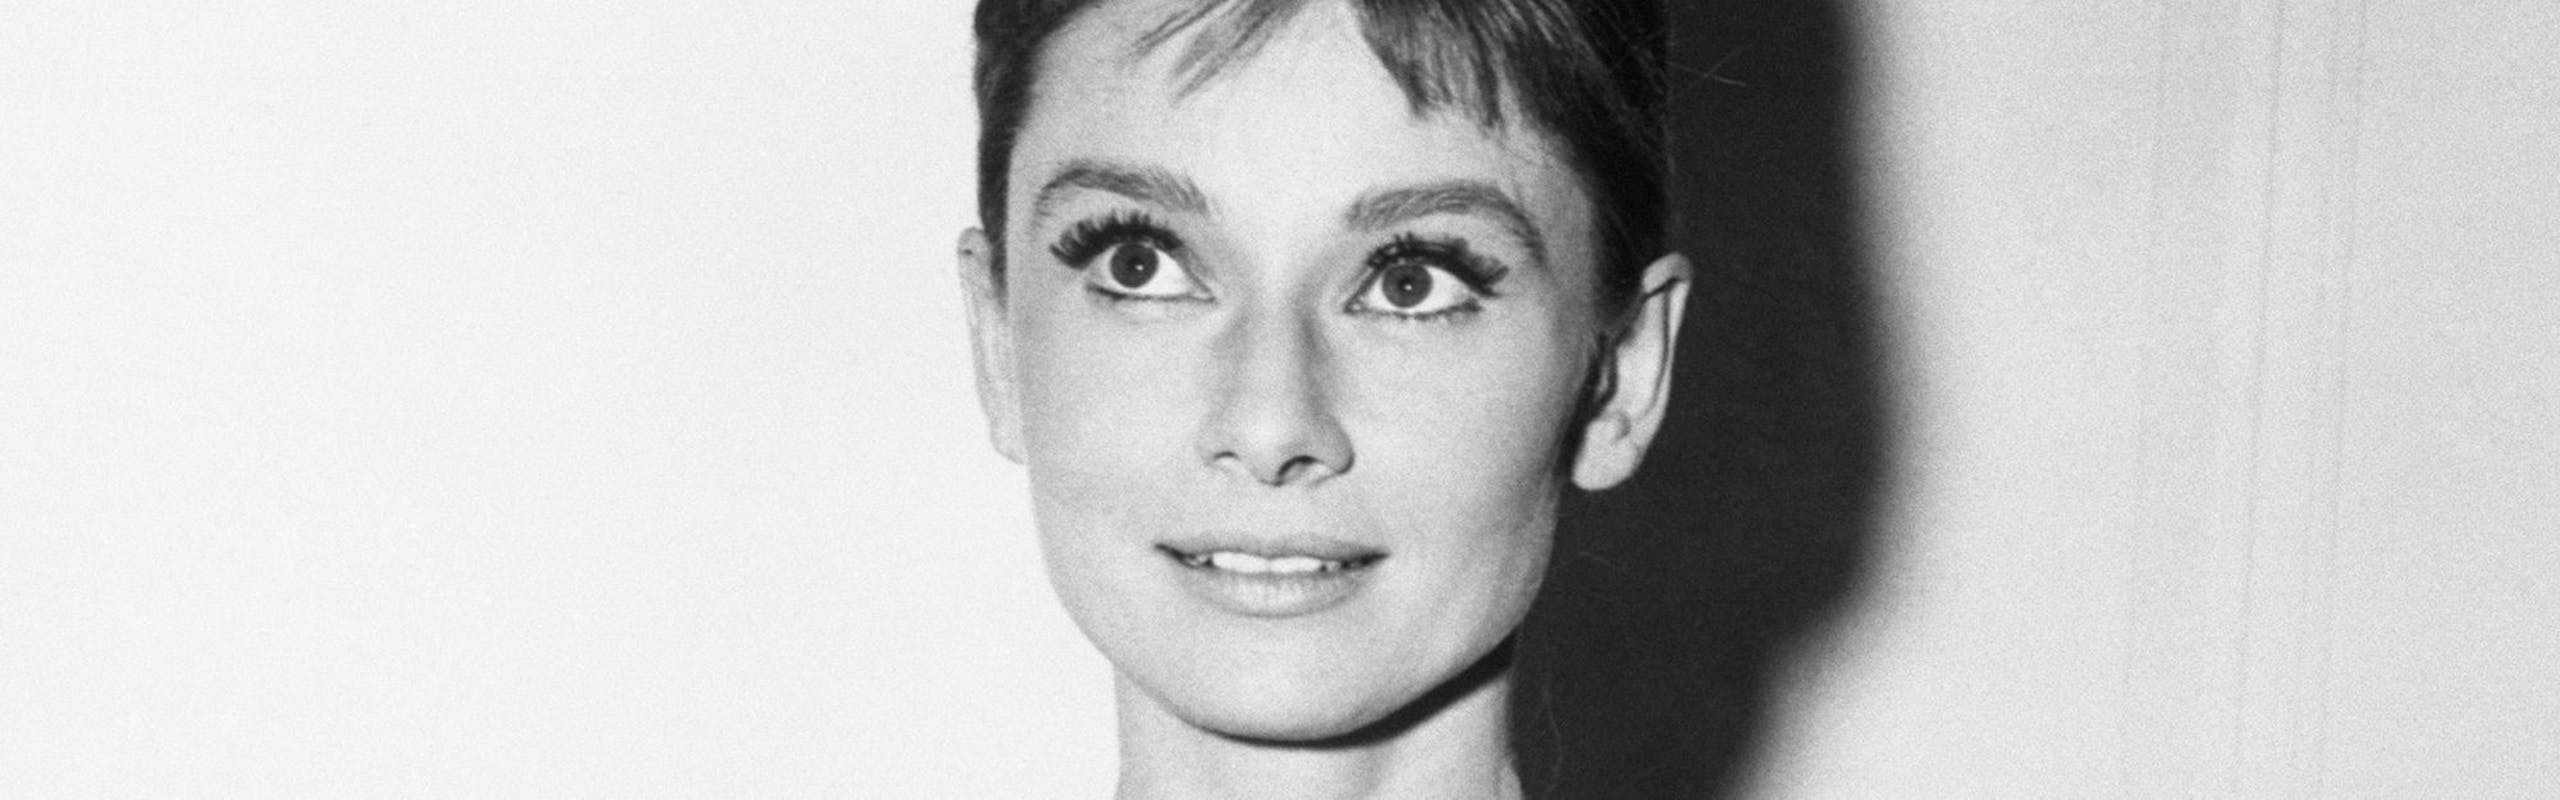 Audrey Hepburn poses in iconic Givenchy black dress from "Breakfast at TIffany's"